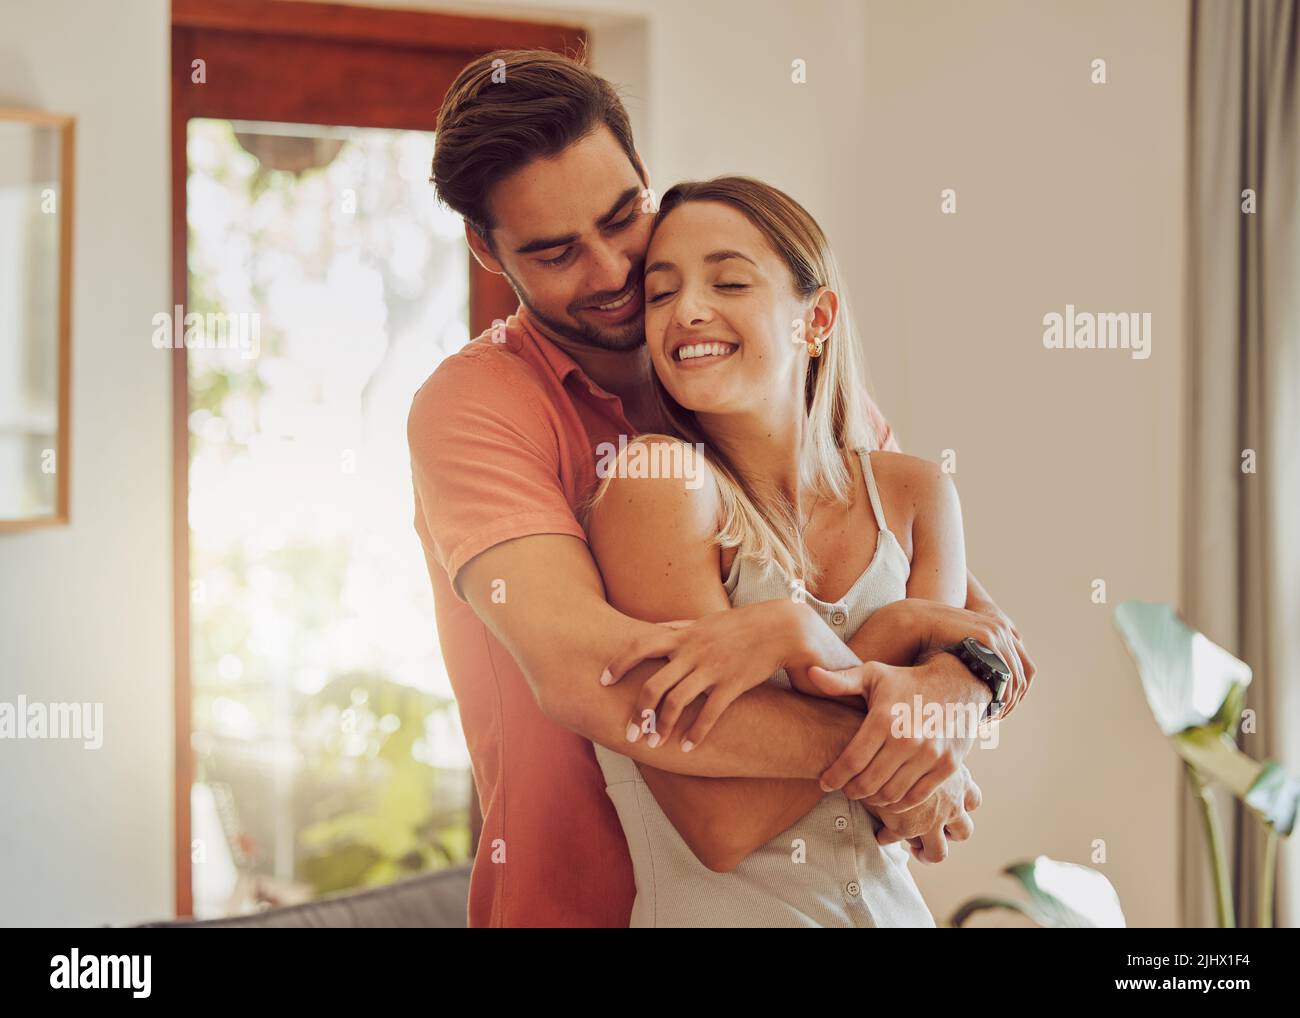 Cherishing these moments. a young couple spending time together at home. Stock Photo